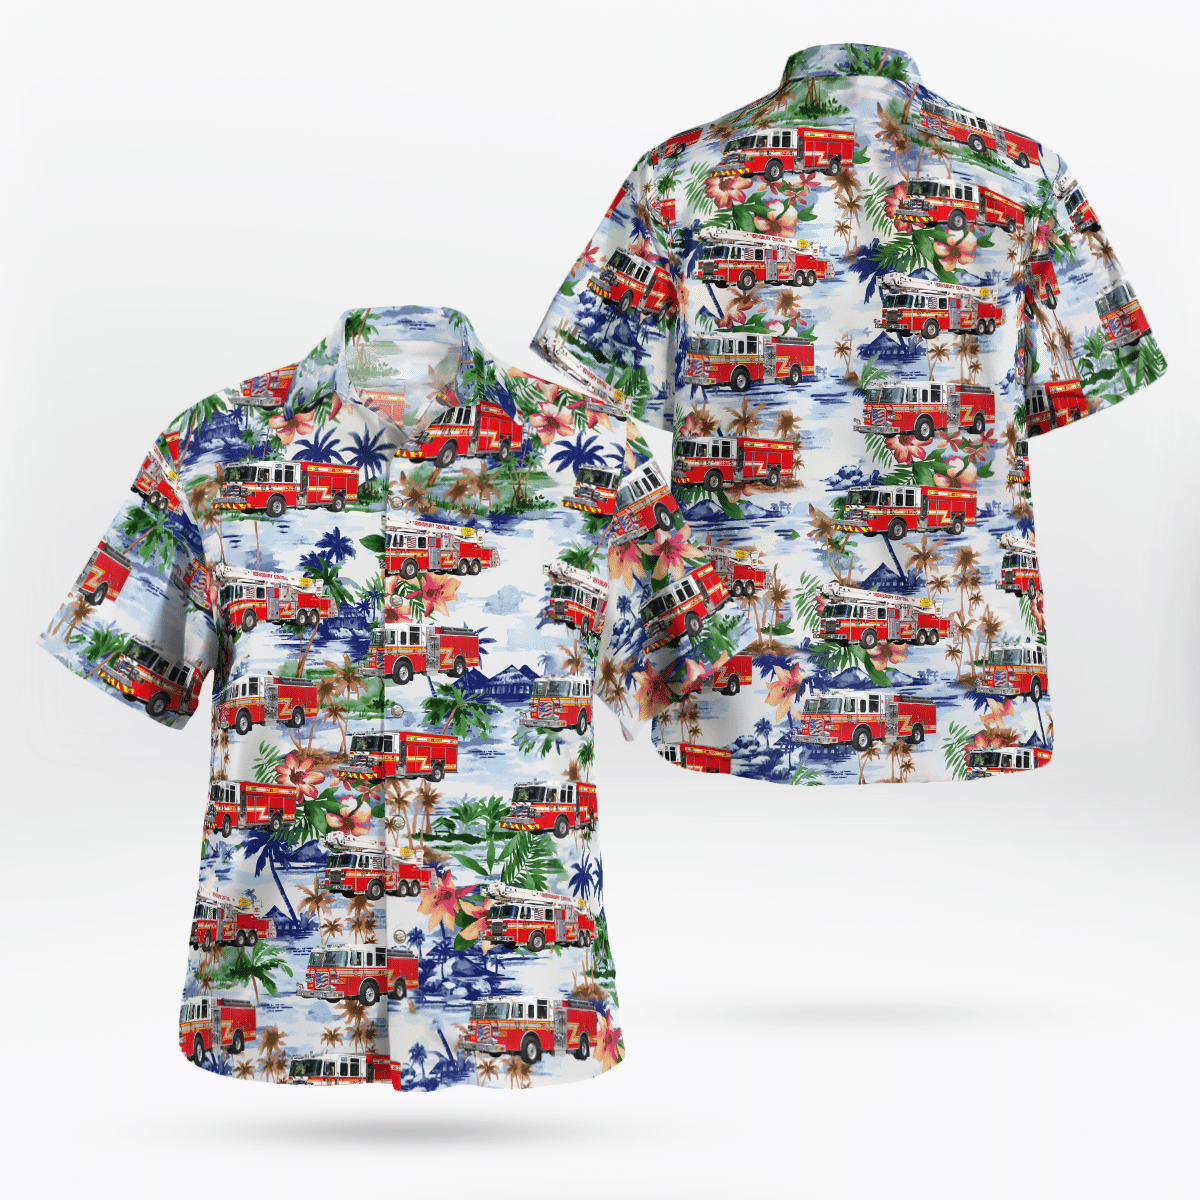 If you are in need of a new summertime look, pick up this Hawaiian shirt 37